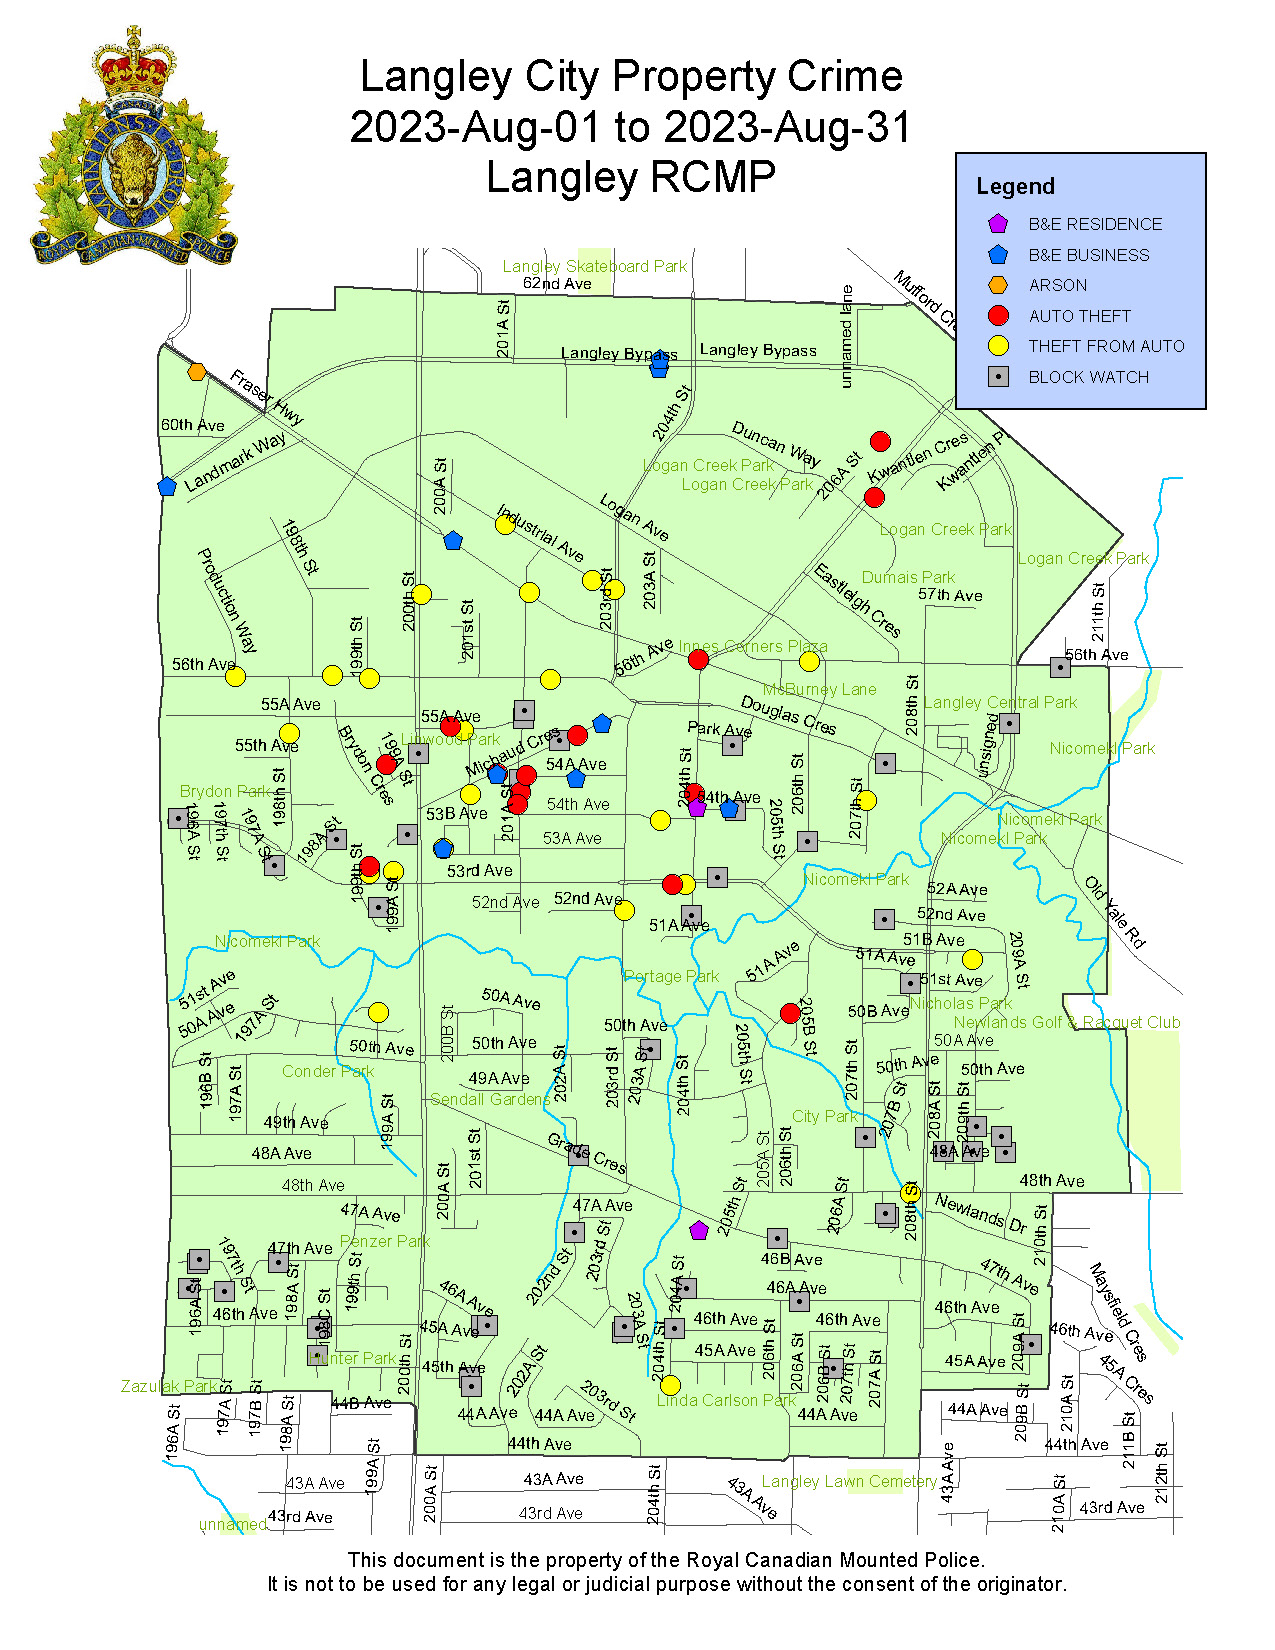 AUGUST 2023 LANGLEY CITY PROPERTY CRIME 